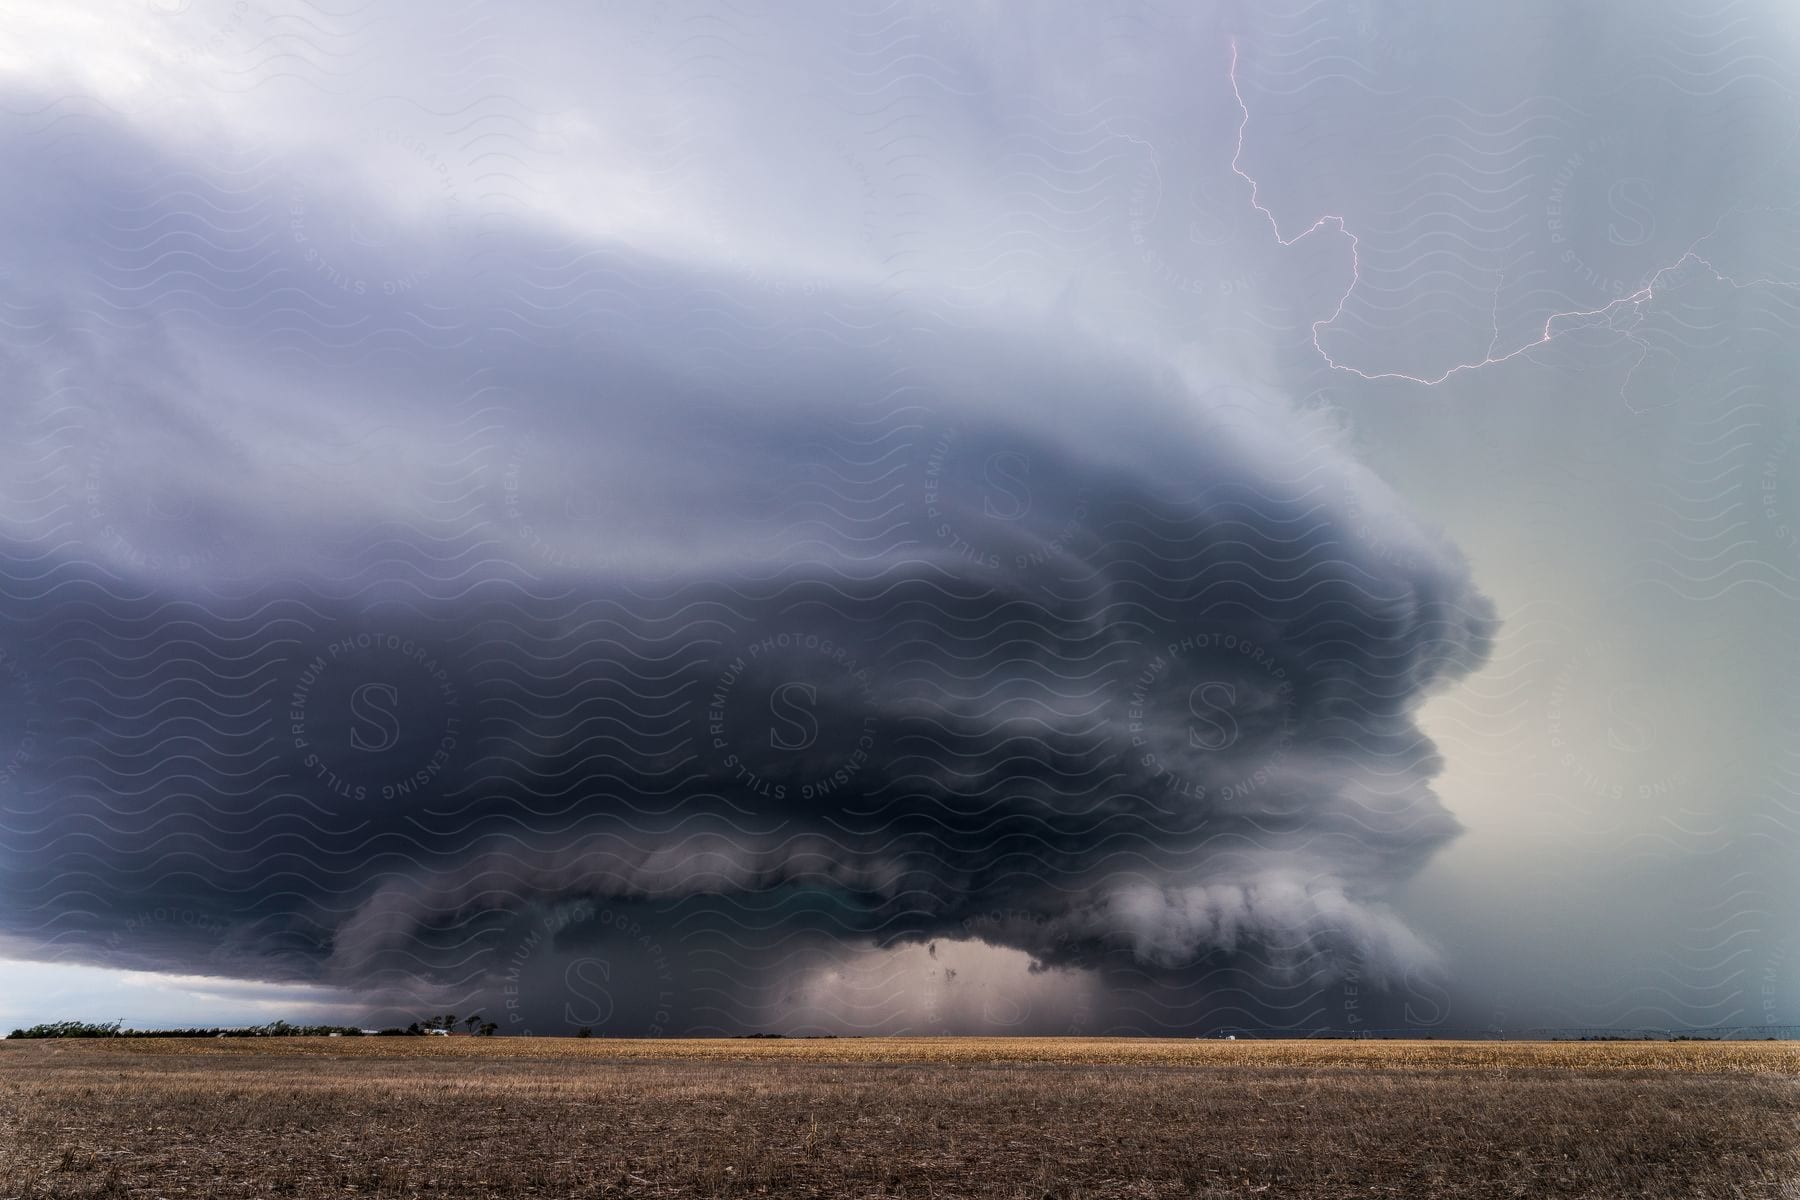 A dark supercell storm moves over farmland as lightning cracks the sky and rain pours down